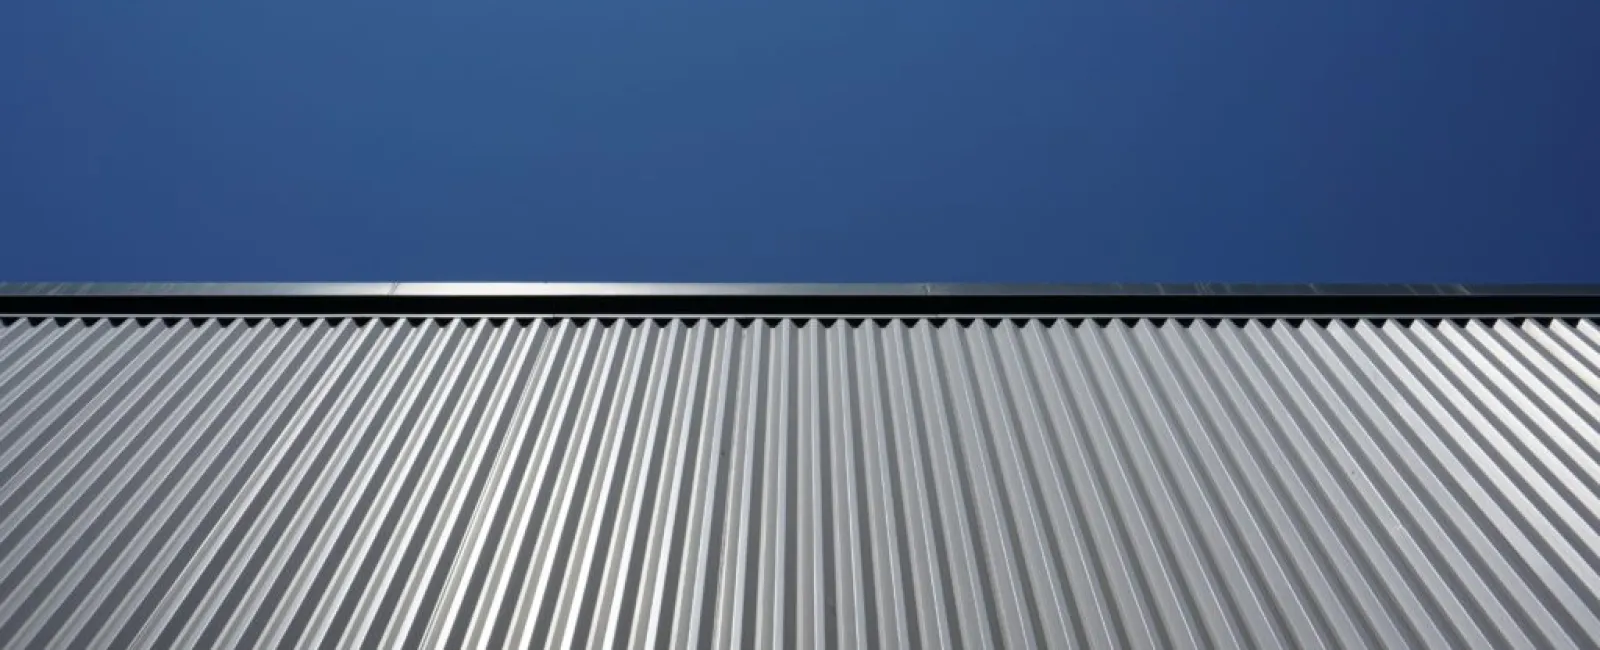 Crucial Ways to Prevent Metal Roofing From Rusting